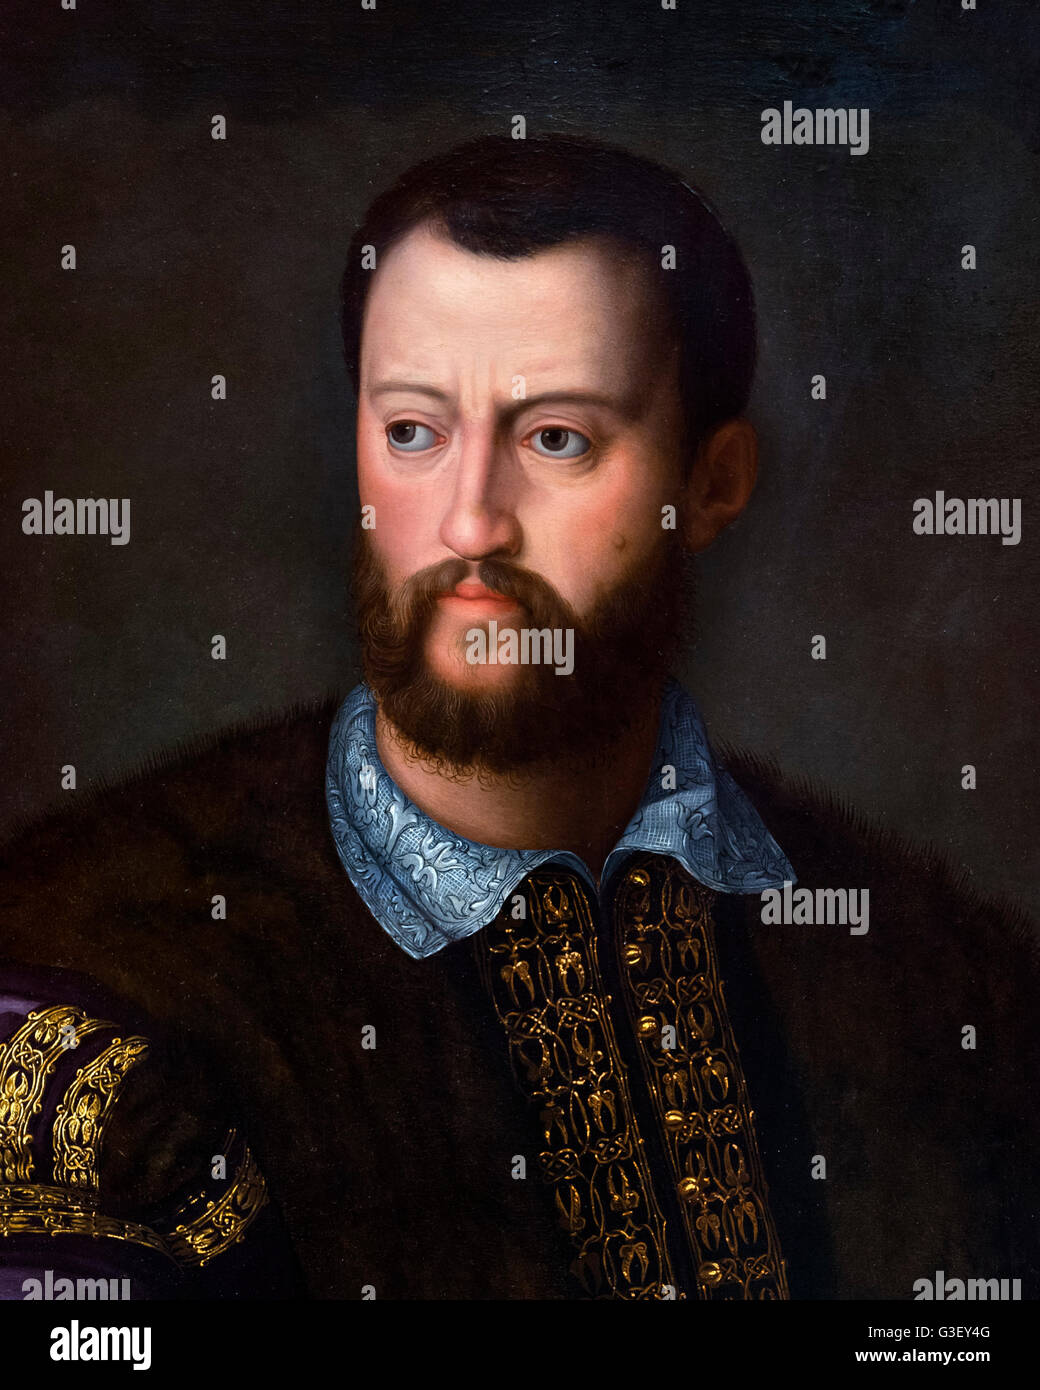 Cosimo I de' Medici (1519-1574), Grand Duke of Tuscany. He is best remembered today for the creation of the Uffizi gallery in Florence. Portrait by Alessandro Allori after a lost original by Bronzino, oil on panel, c.1555-1560. This image is a detail of a larger painting, G3EY58. Stock Photo